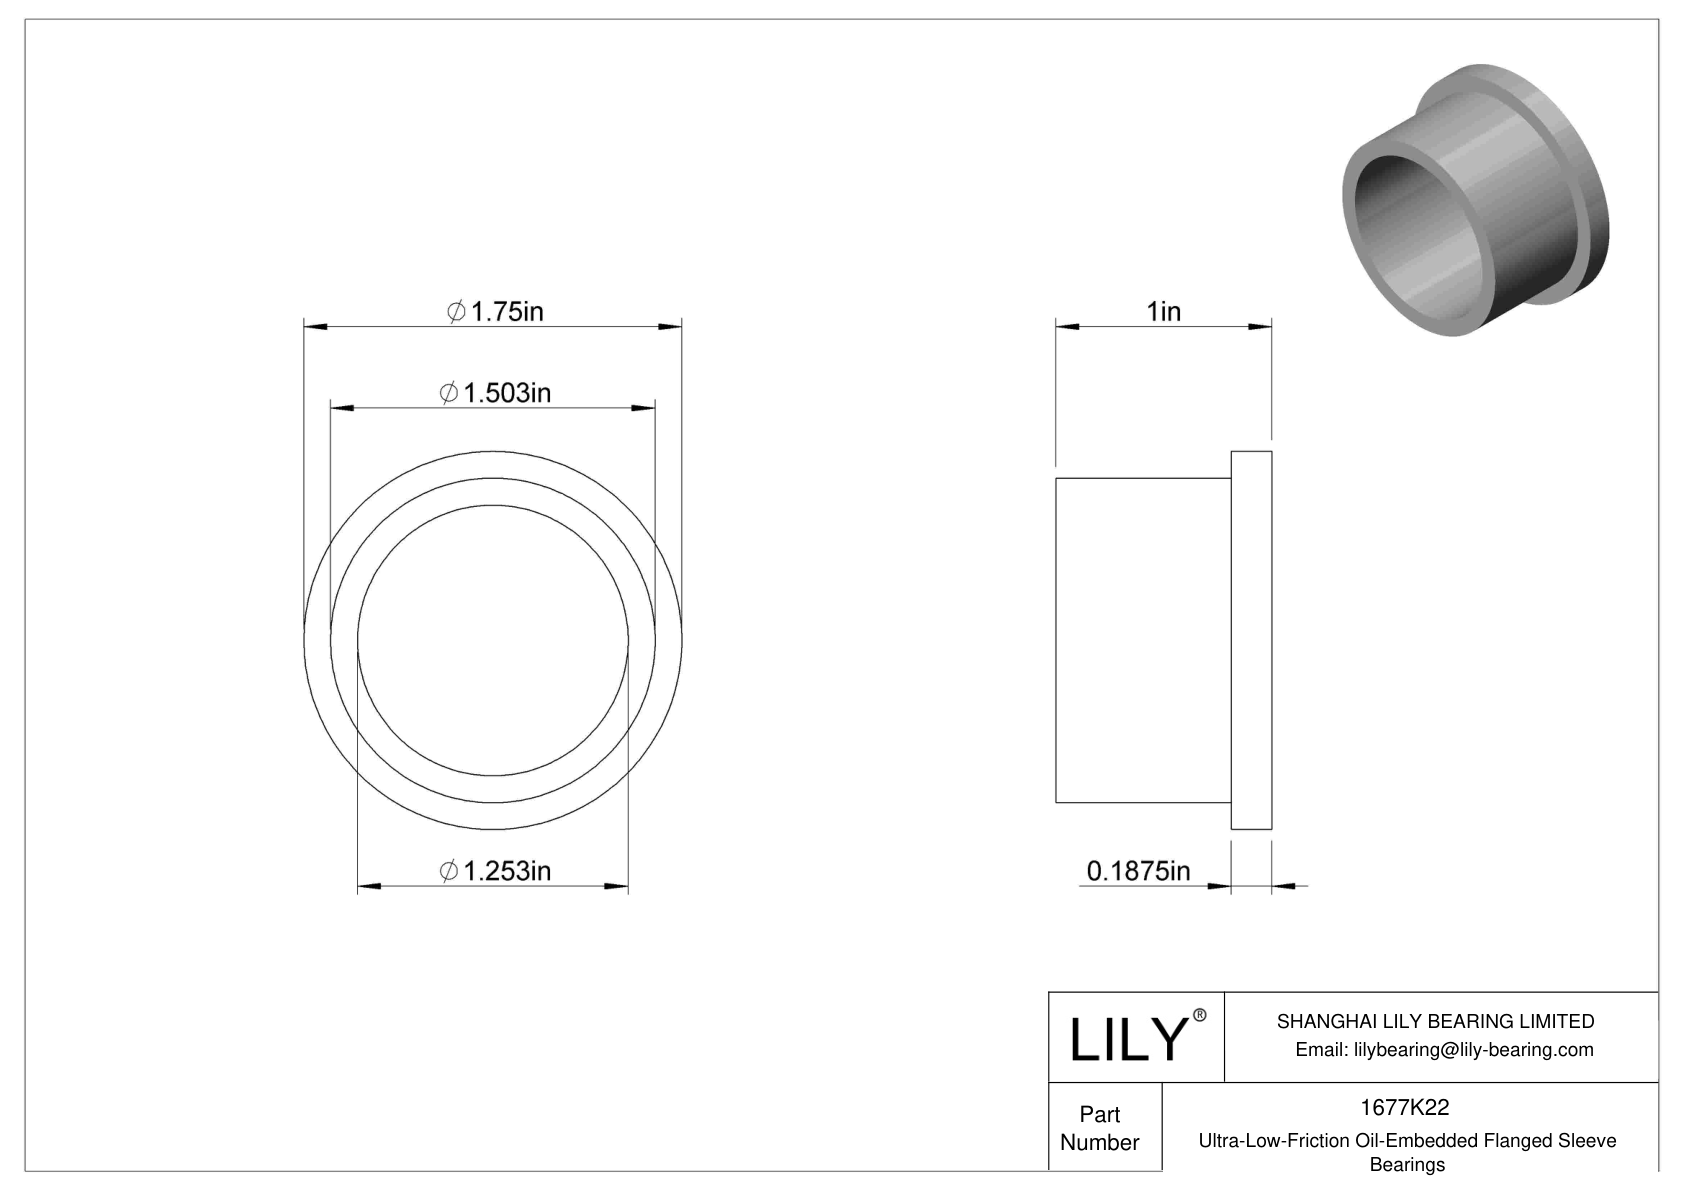 BGHHKCC Ultra-Low-Friction Oil-Embedded Flanged Sleeve Bearings cad drawing